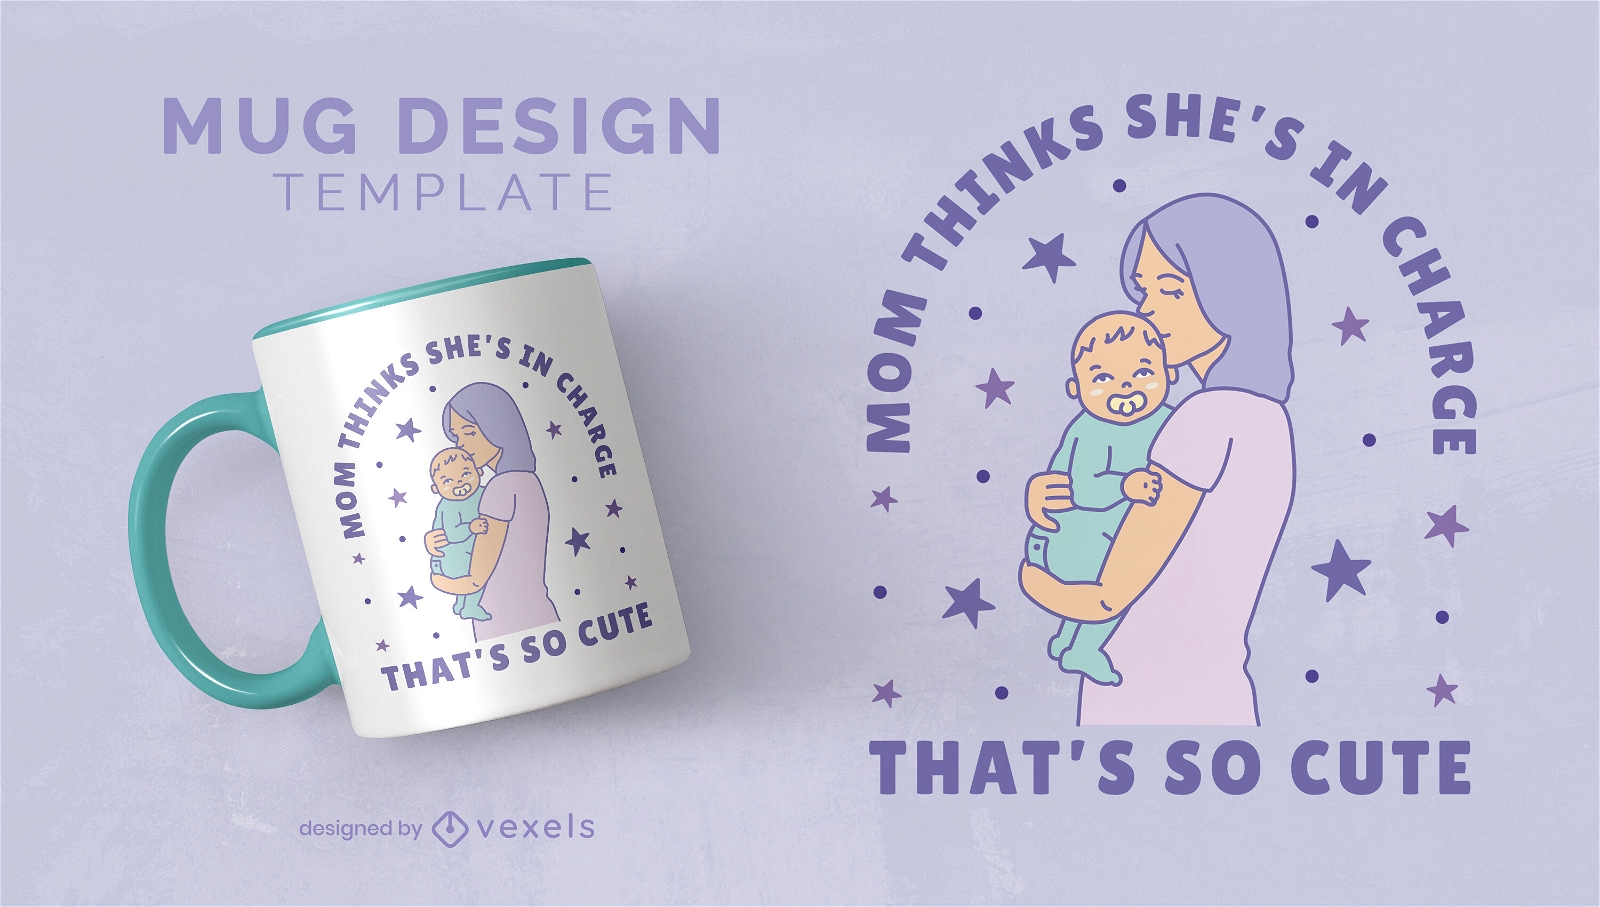 https://images.vexels.com/media/users/3/307176/raw/f85e4238a8ff4ca29c771ef4f19e00ab-cute-mother-and-baby-family-mug-template.jpg